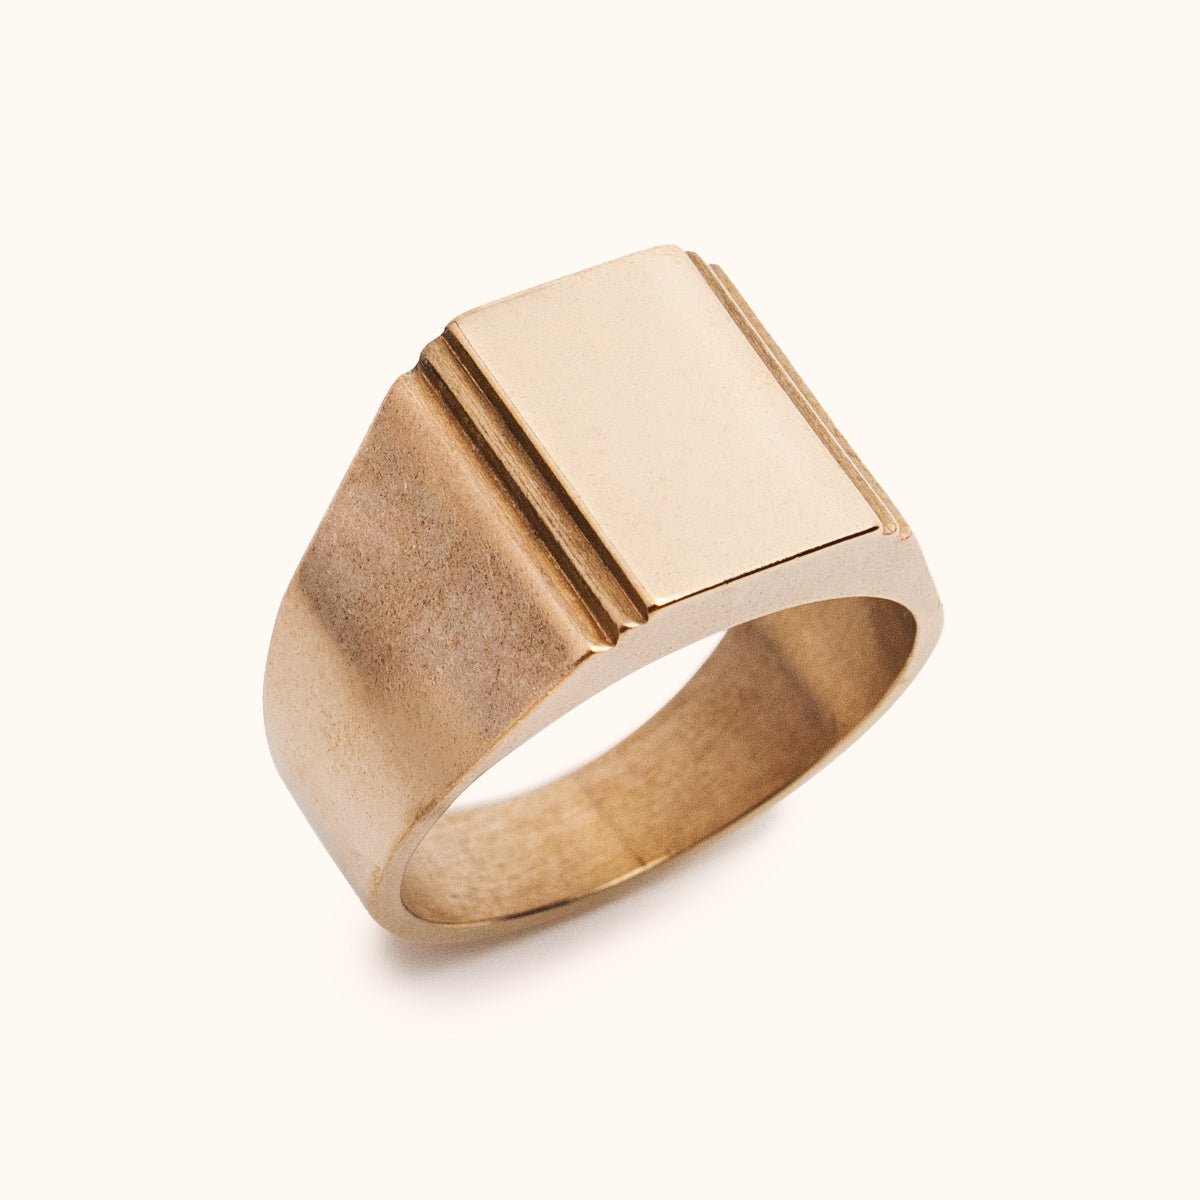 A wide bang rectangular signet ring with a stair step cut out design. Made of Bronze. The Suscita Ring is designed and handcrafted in Portland, Oregon.